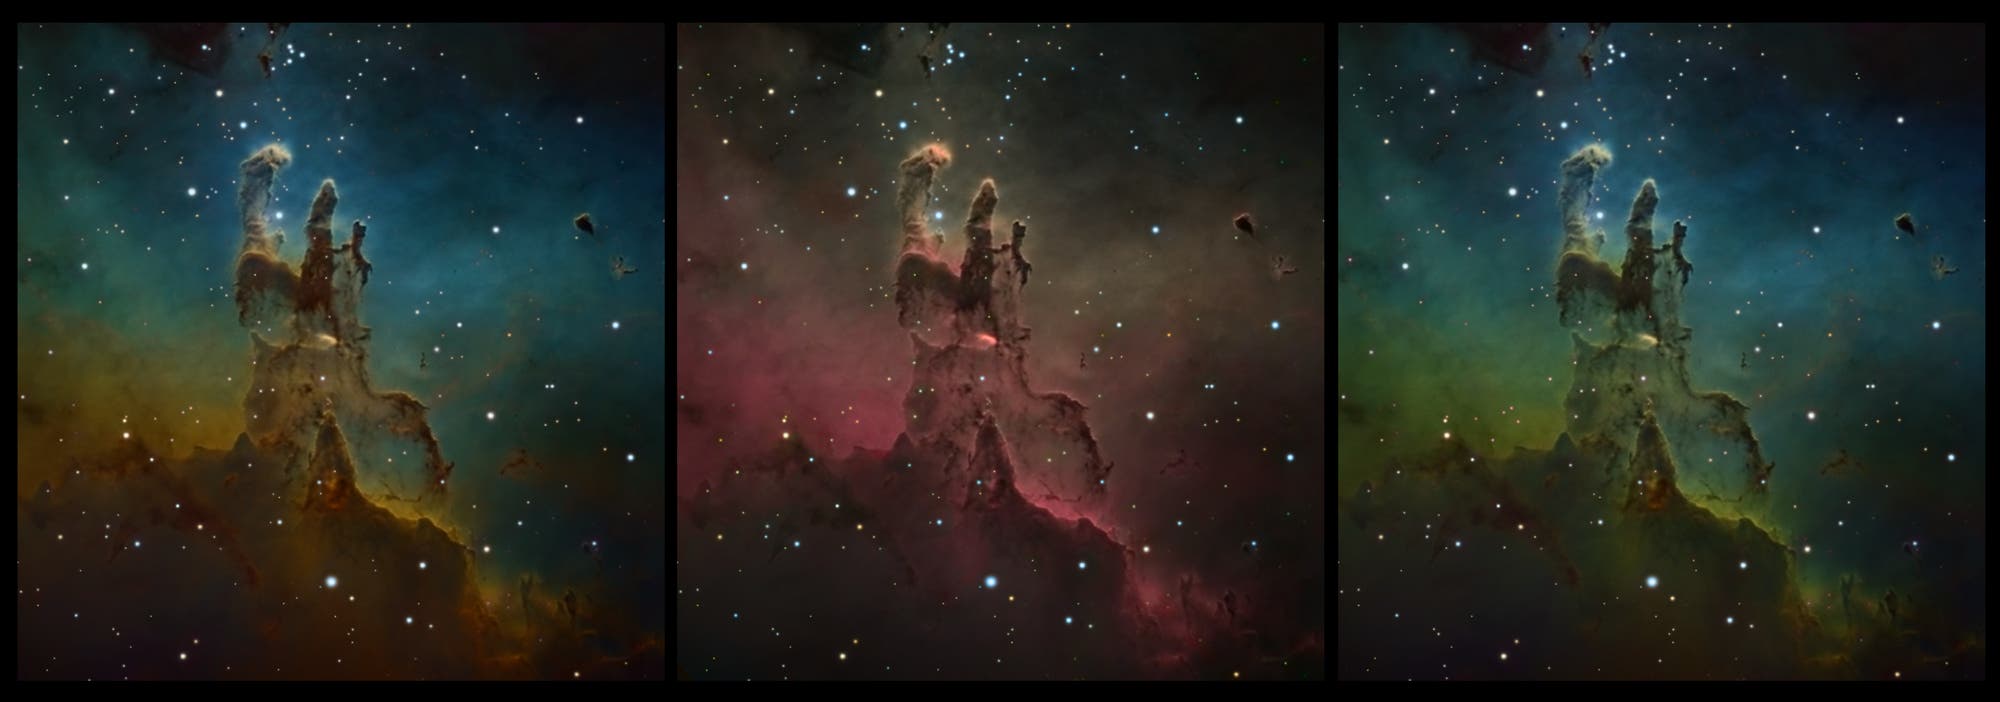 Closeup Study of the Pillars of Creation M16 - Tribute to the HST